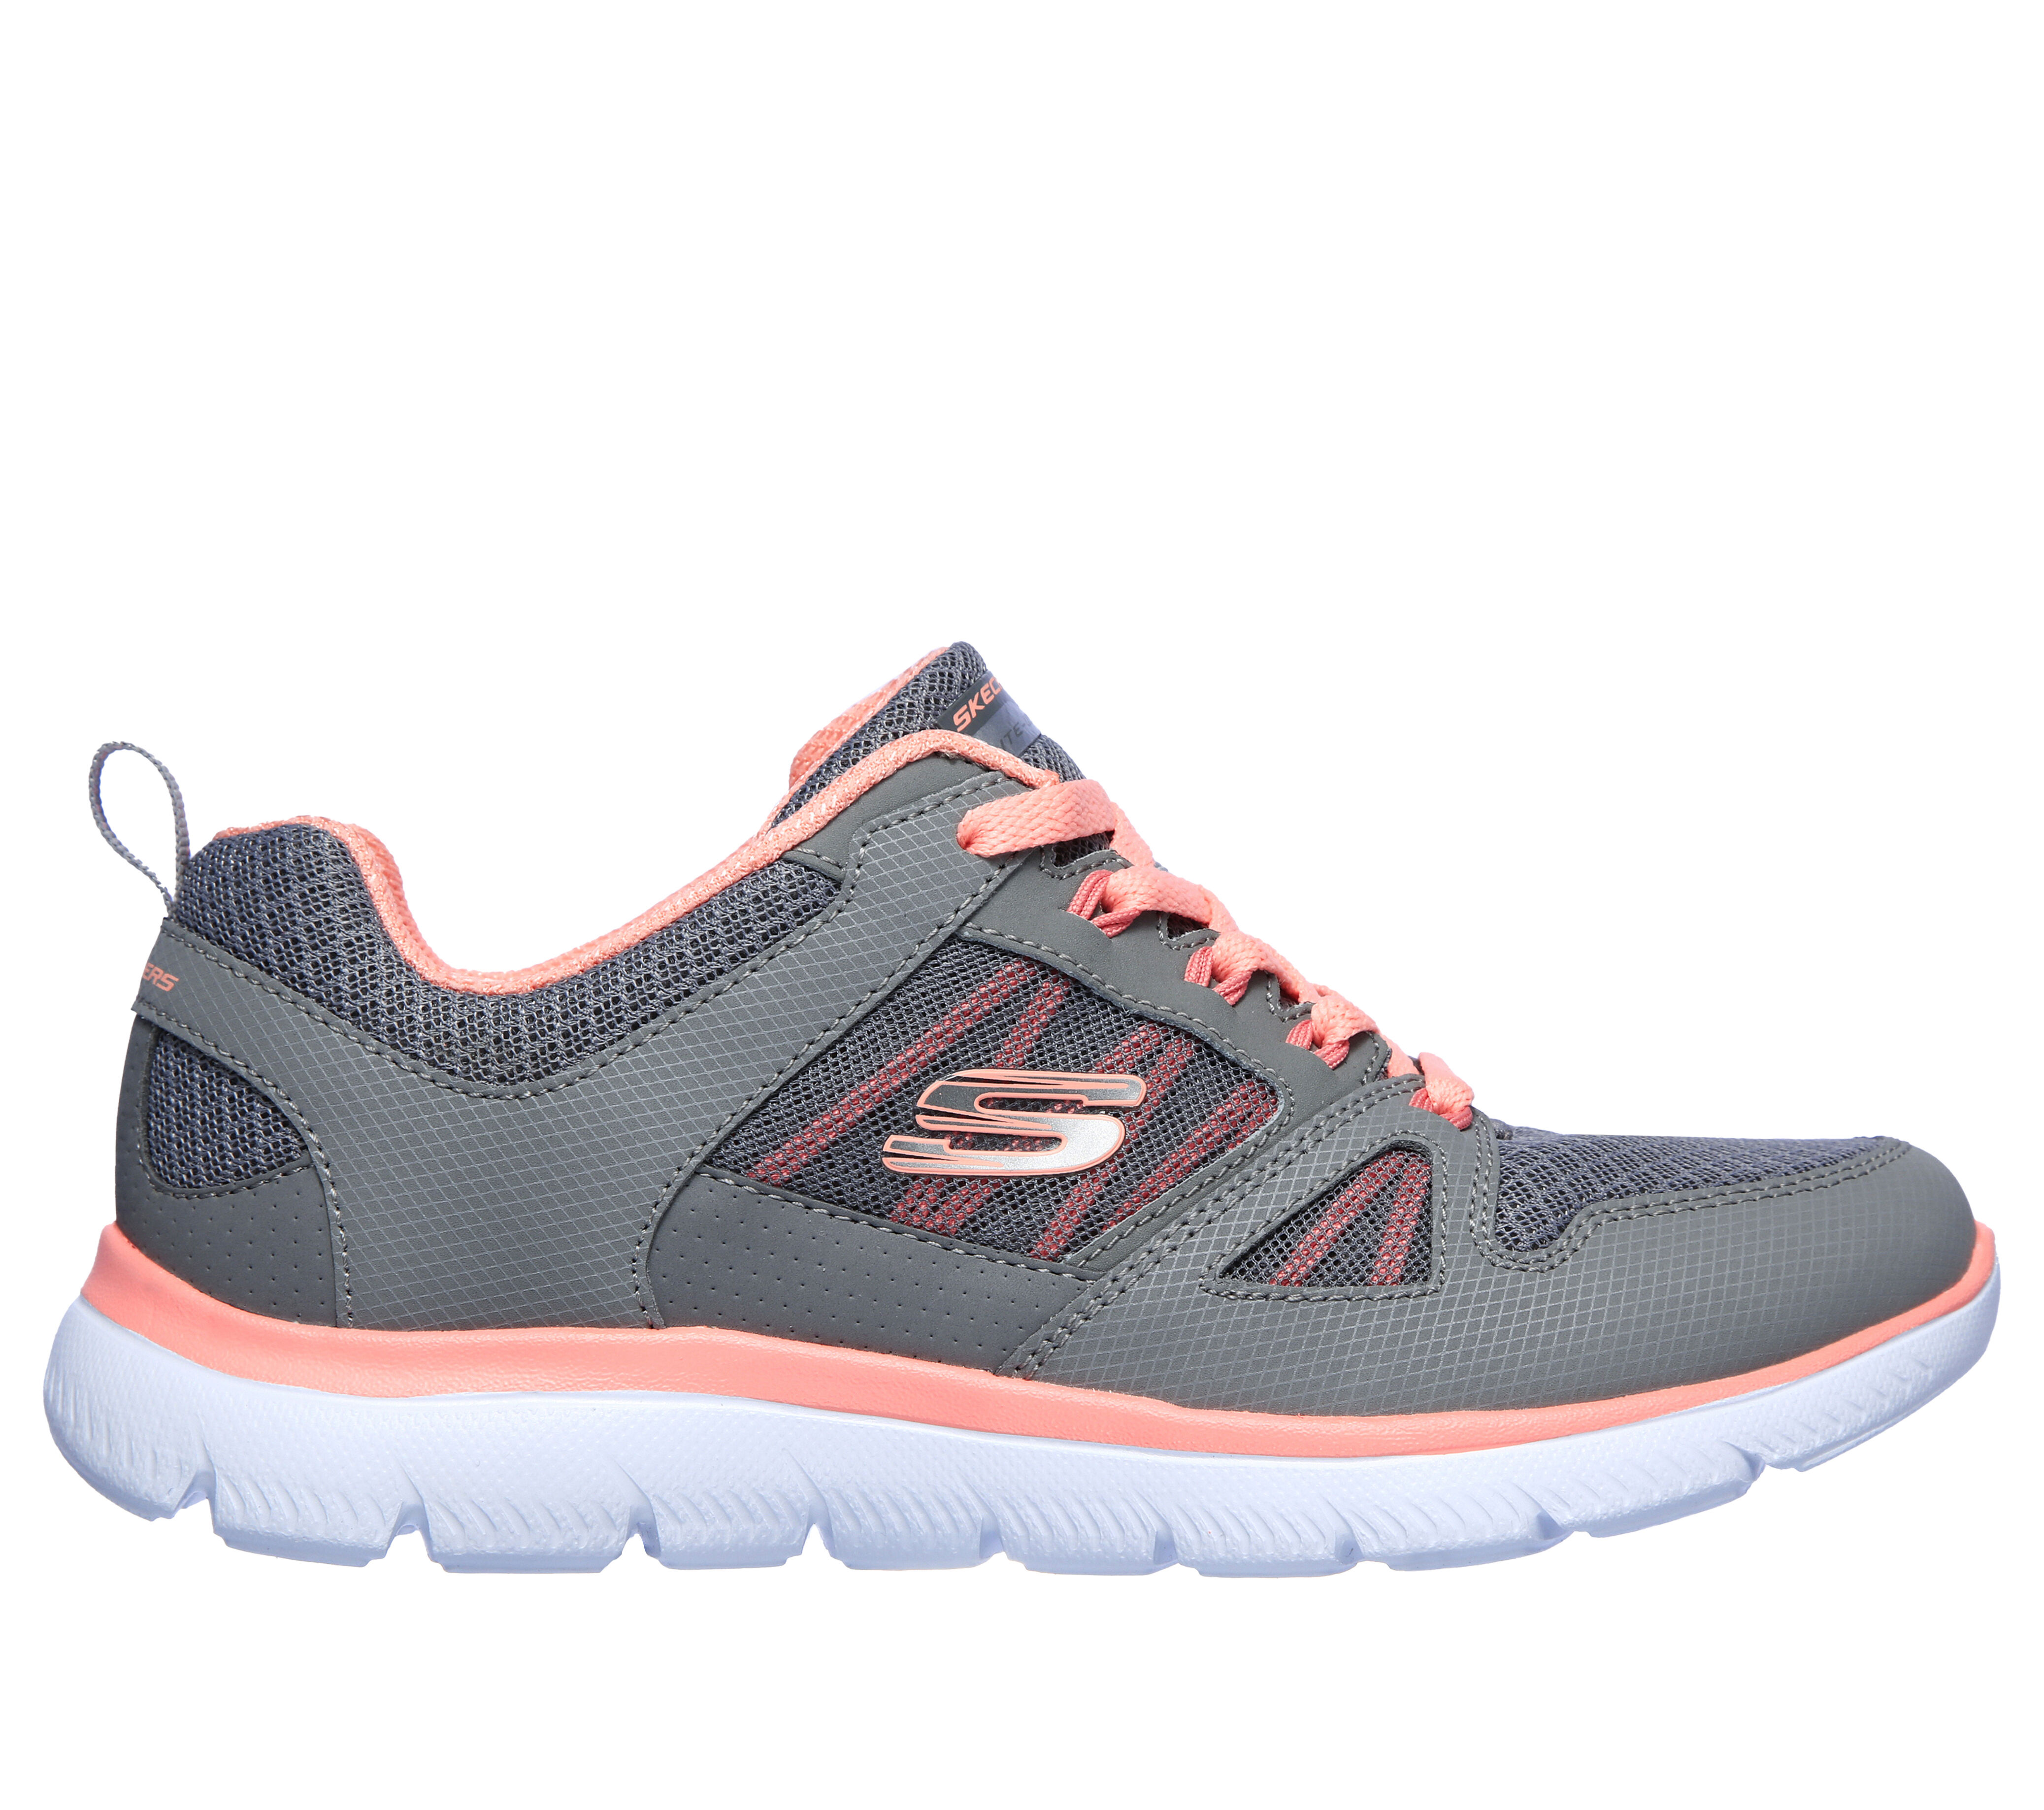 skechers new collection 219